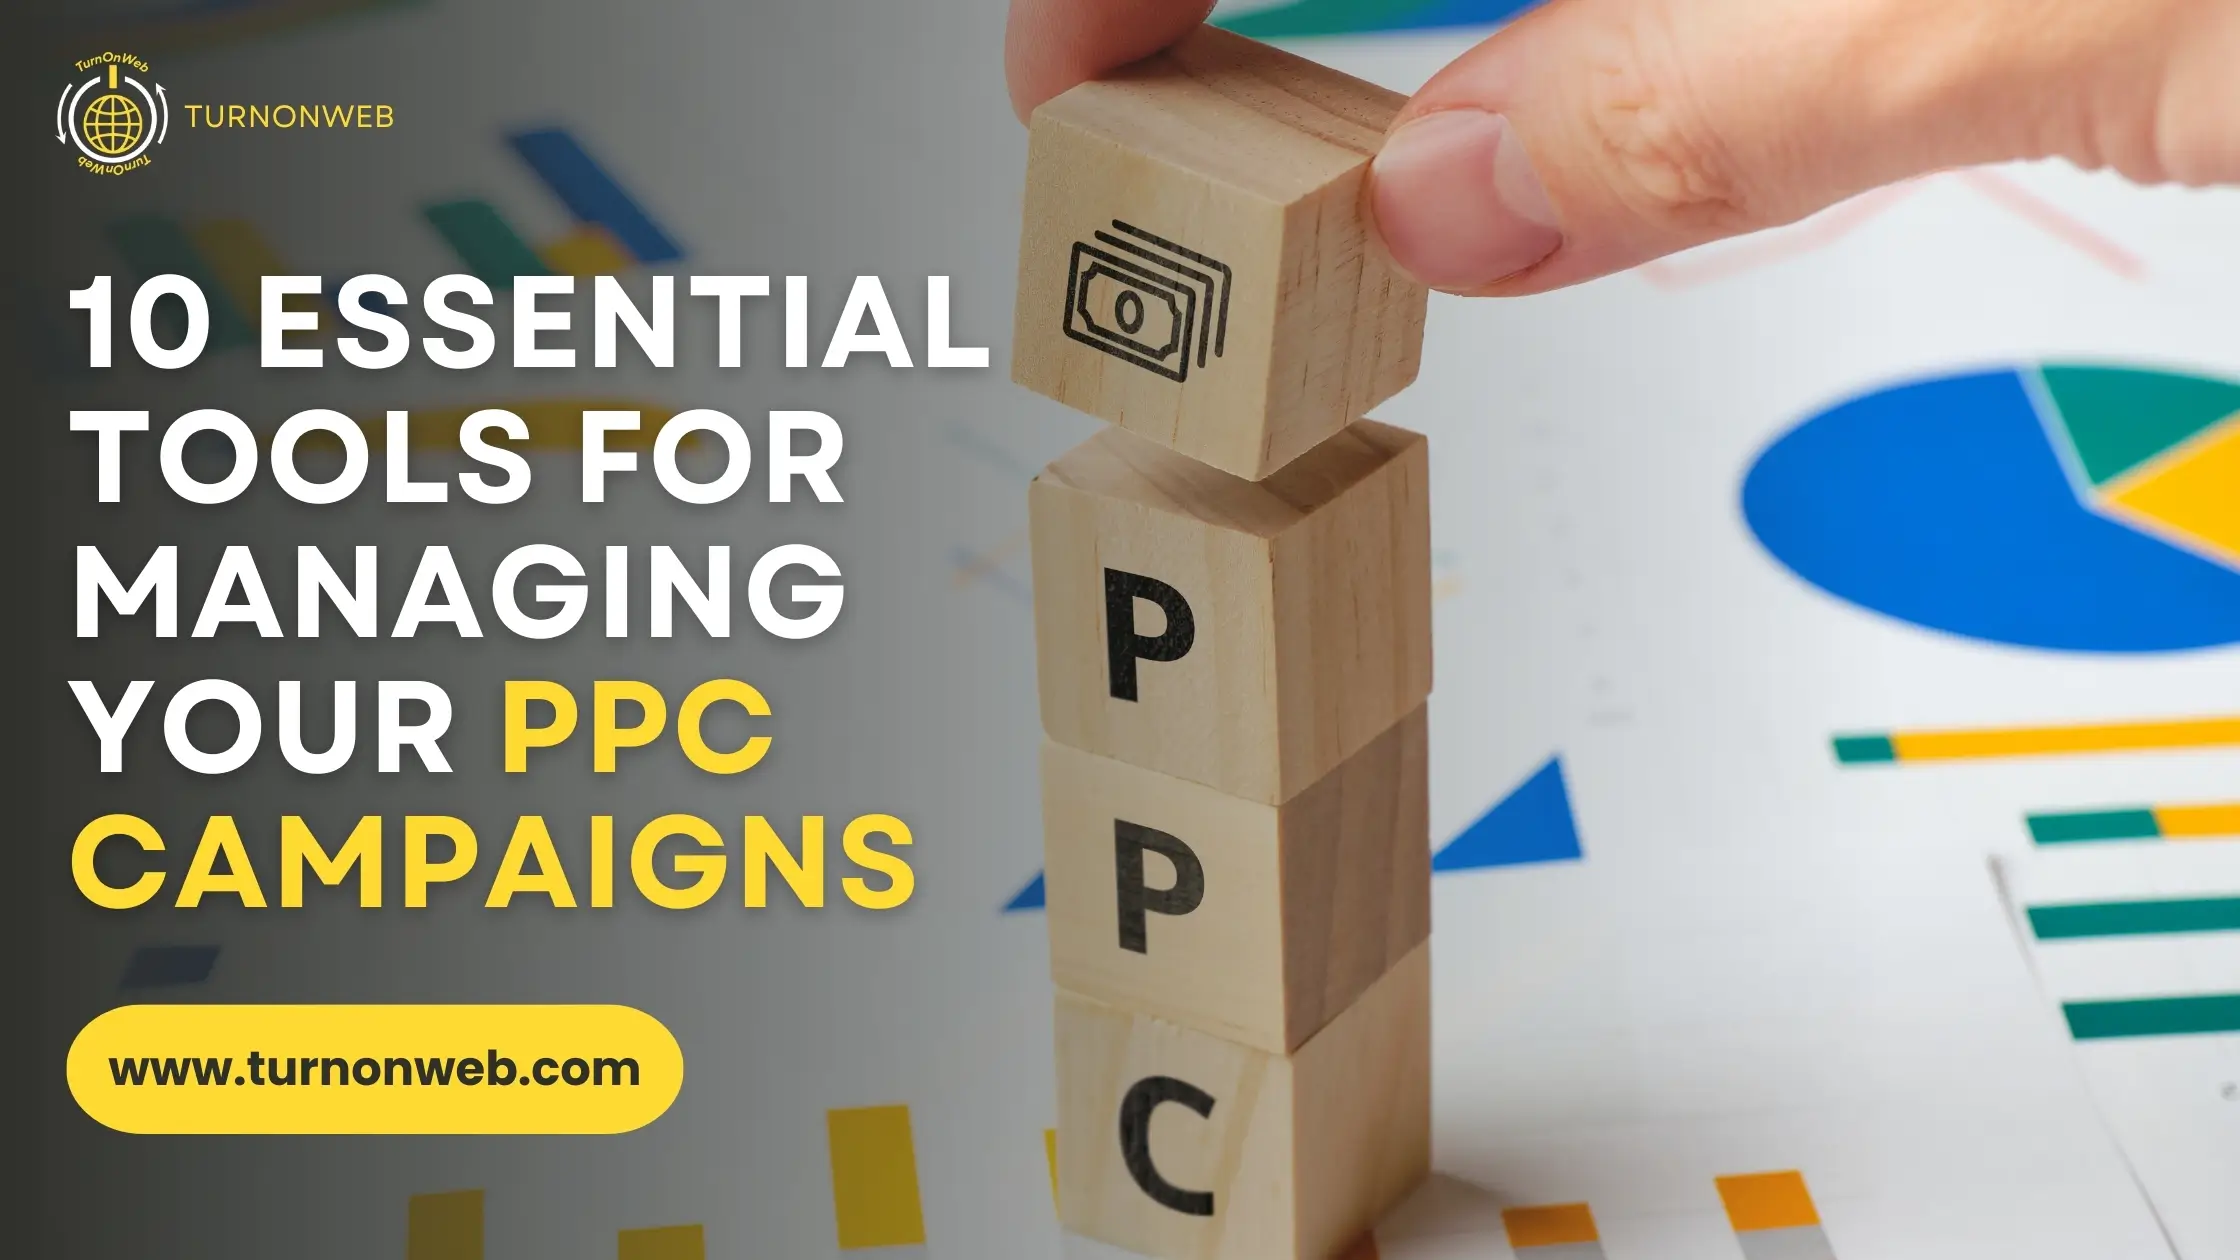 10 Essential Tools for Managing Your PPC Campaigns